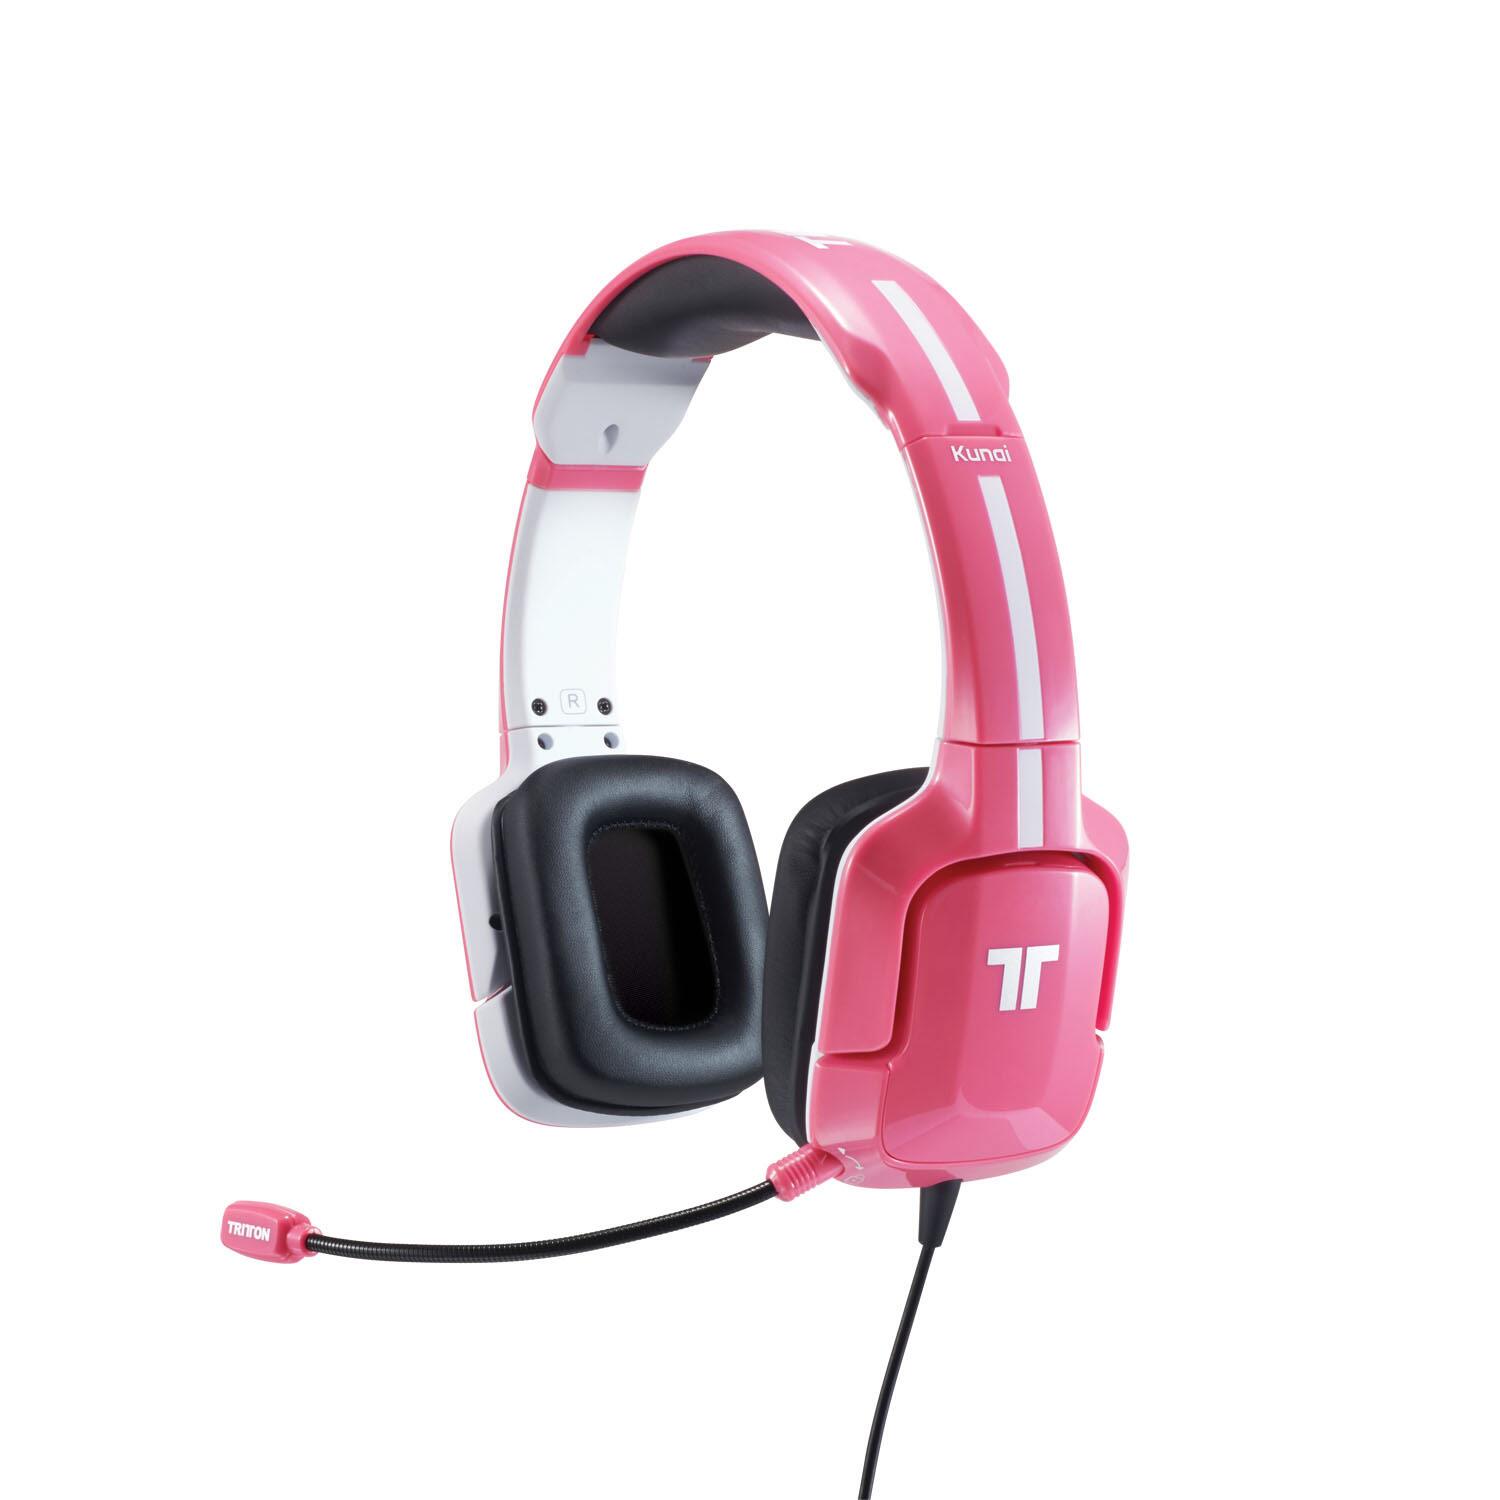 TRITTON Twitter: "The universal PINK @TRITTON Kunai Gaming Headset is available at @GameStop NOW! | http://t.co/QKEKatG4Pf" /